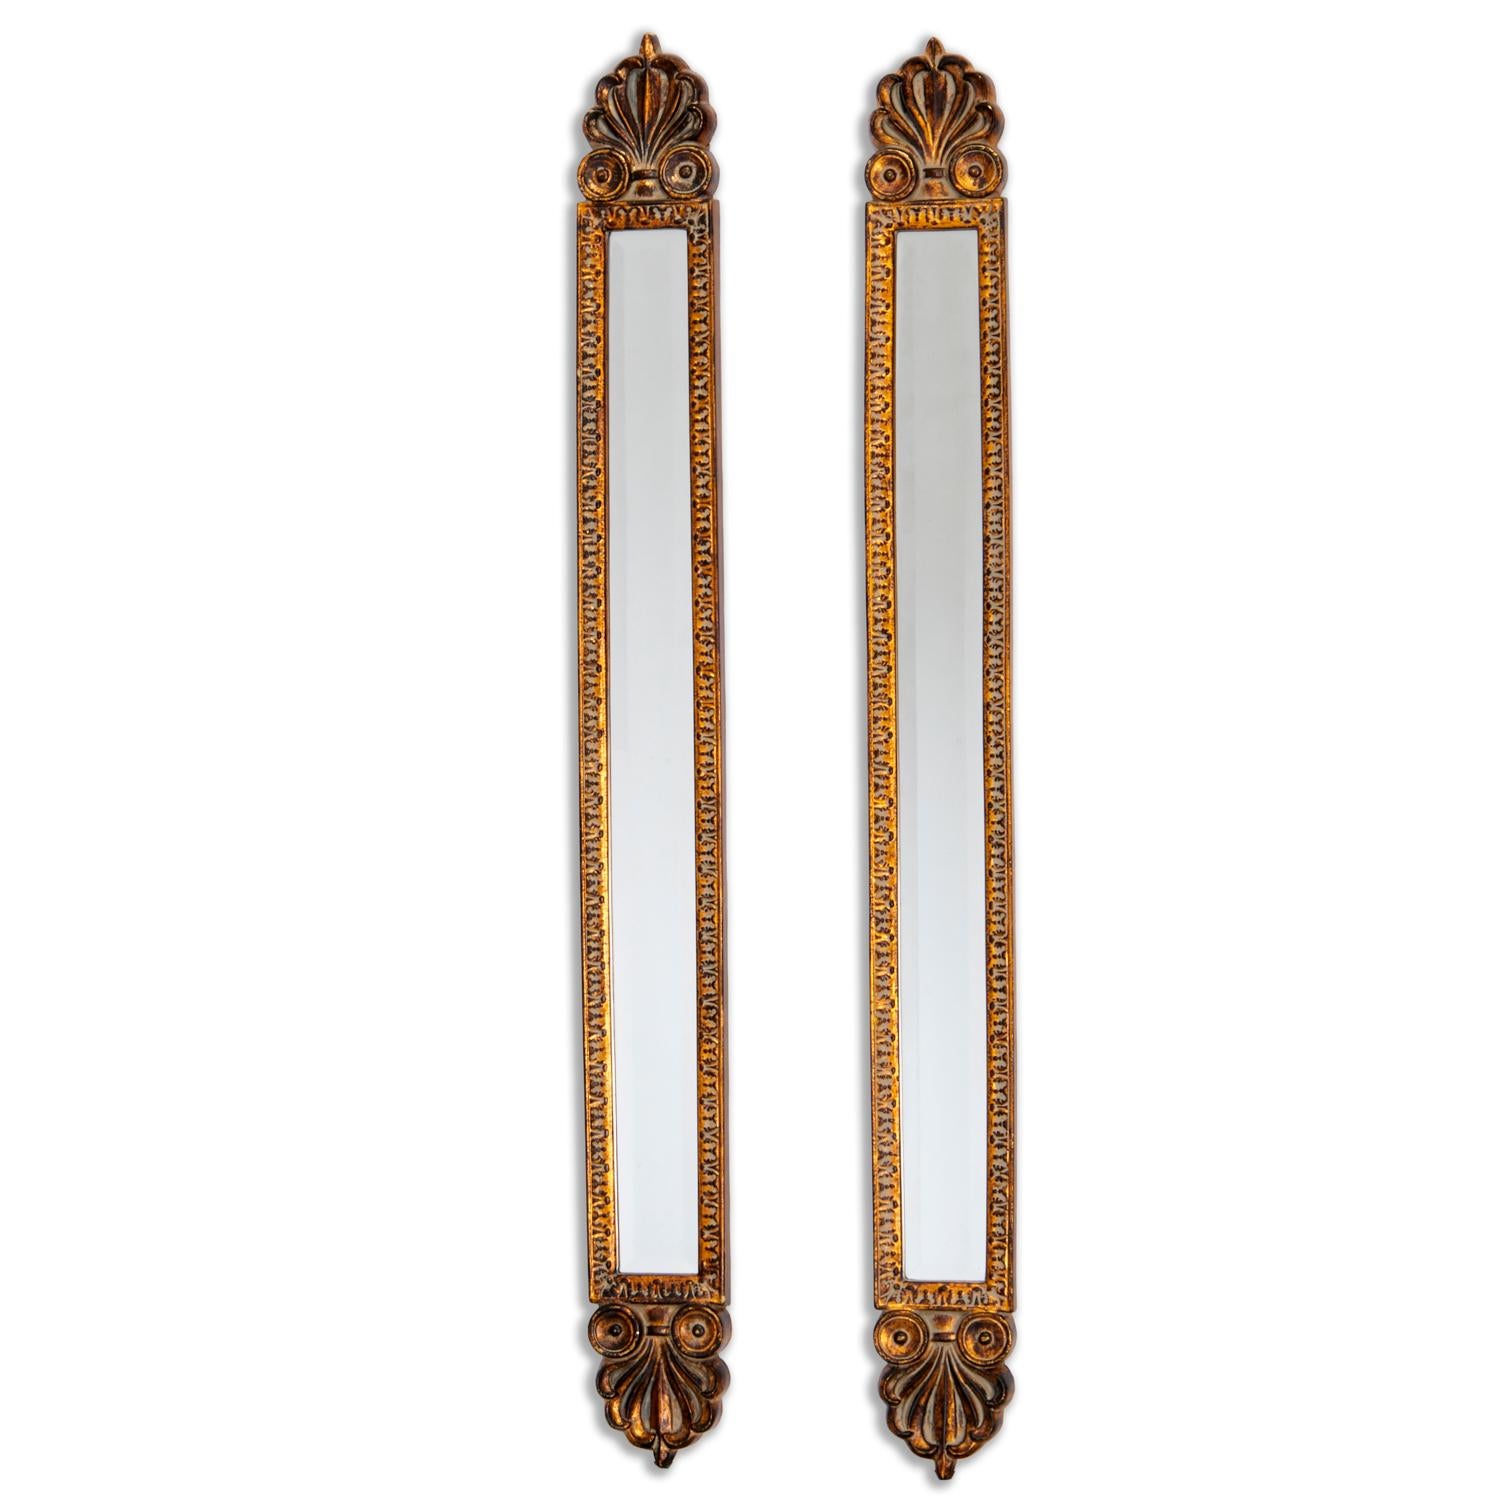 A Pair of Vintage Neo-Classical Style Pillar Mirrors  In Good Condition For Sale In Morristown, NJ